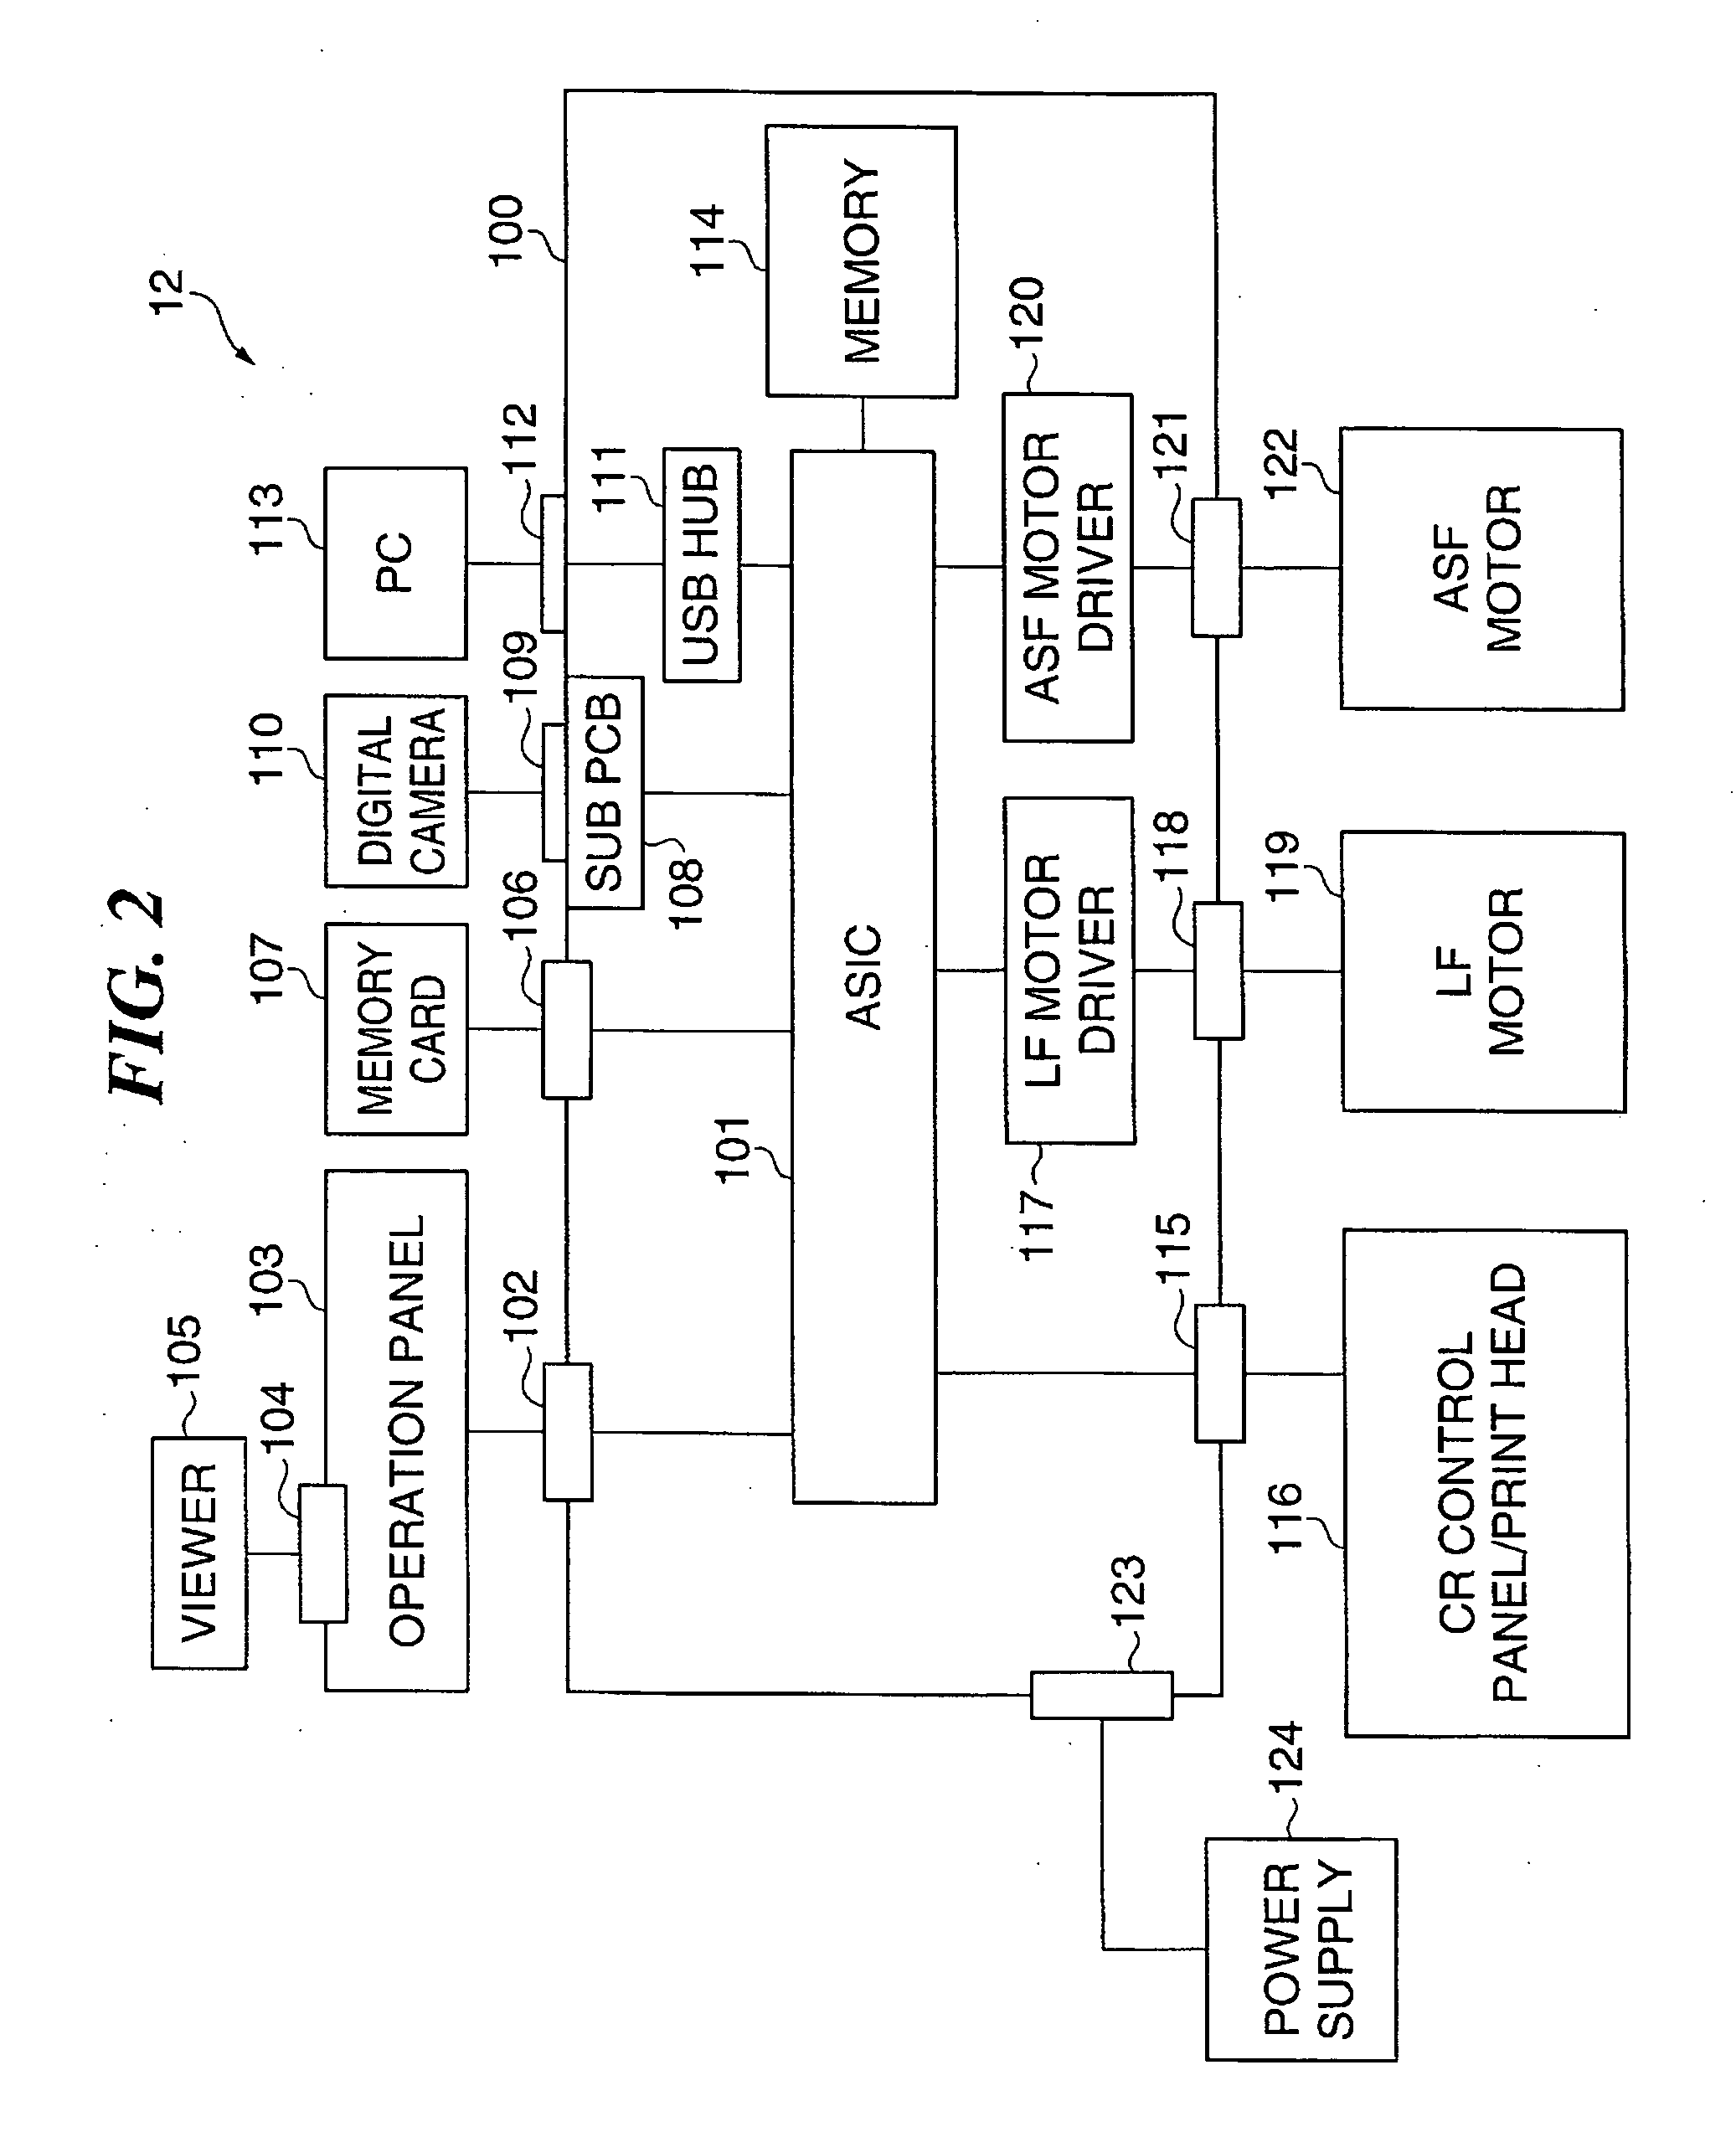 Image recording apparatus, method of generating print data for the same, and control program for implementing the method